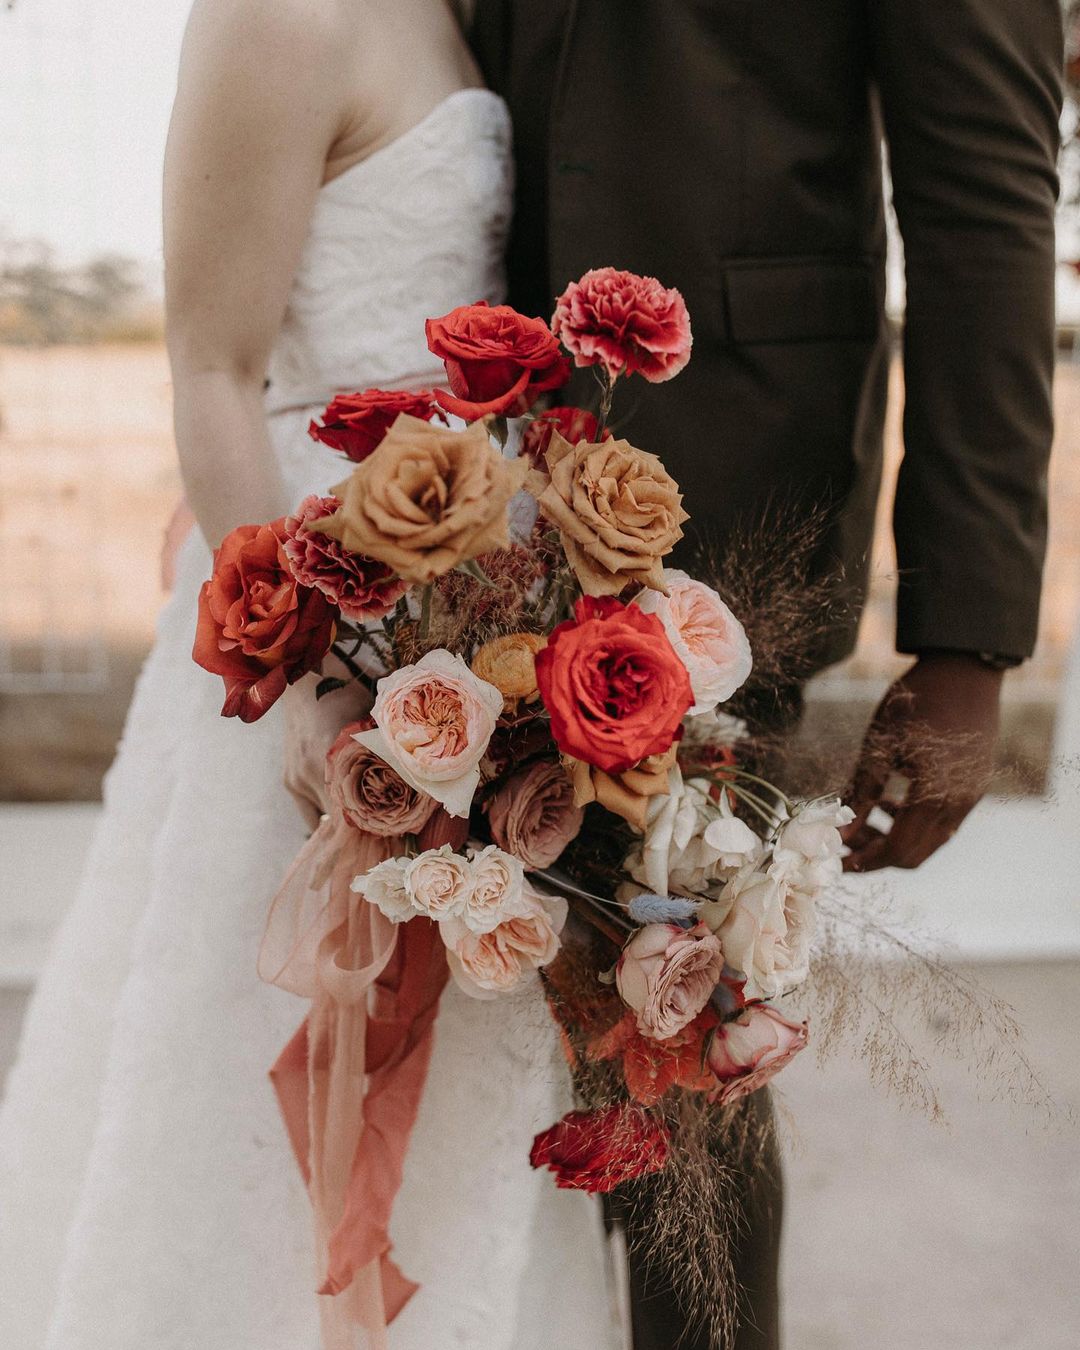 wedding bouquet ideas inspiration rose gold and marsala flowers